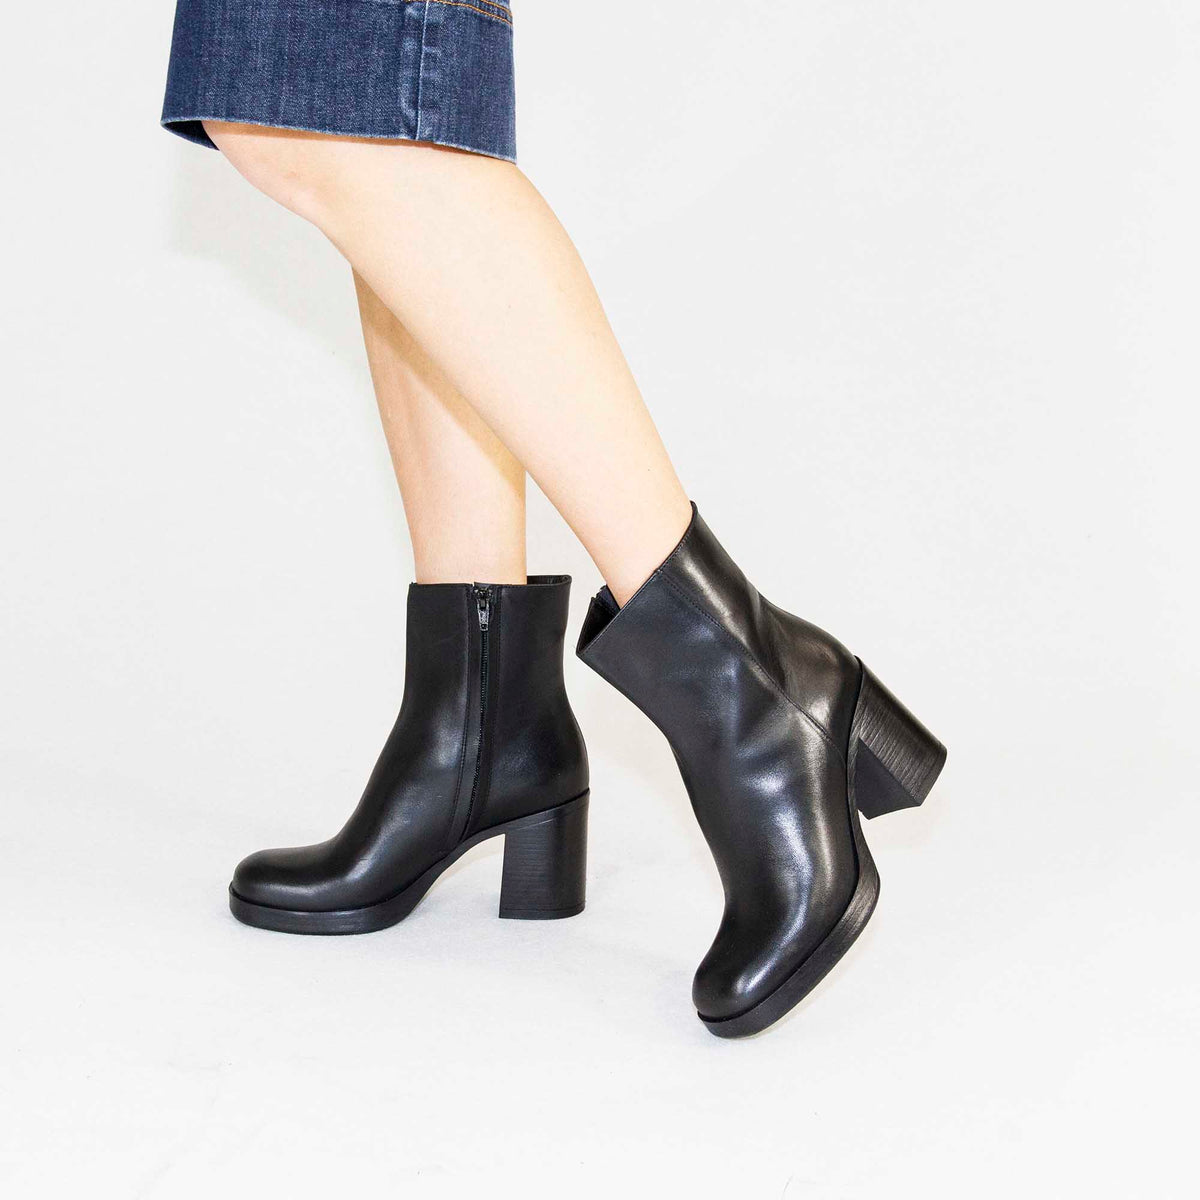 Women's square heel ankle boots in black leather 